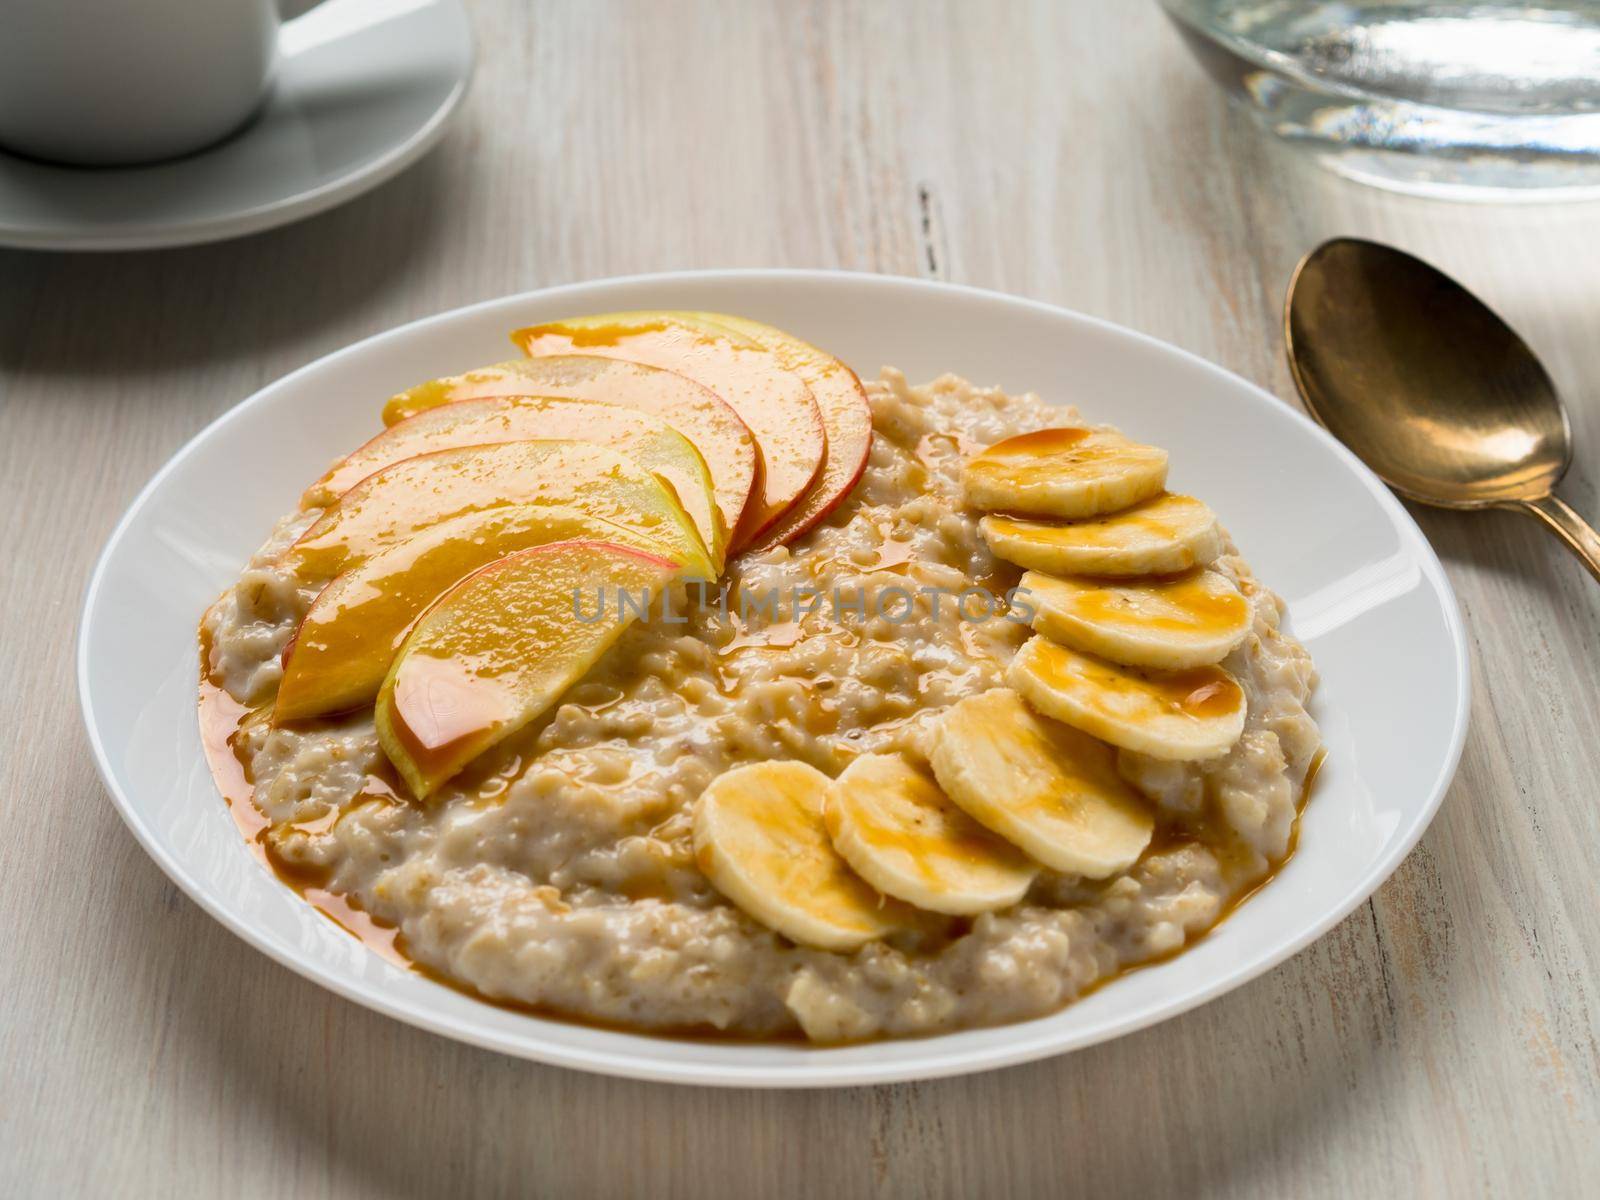 Healthy Breakfast in the morning - oatmeal with fruit and honey, slices of apples and bananas, caramel syrup. Selective focus